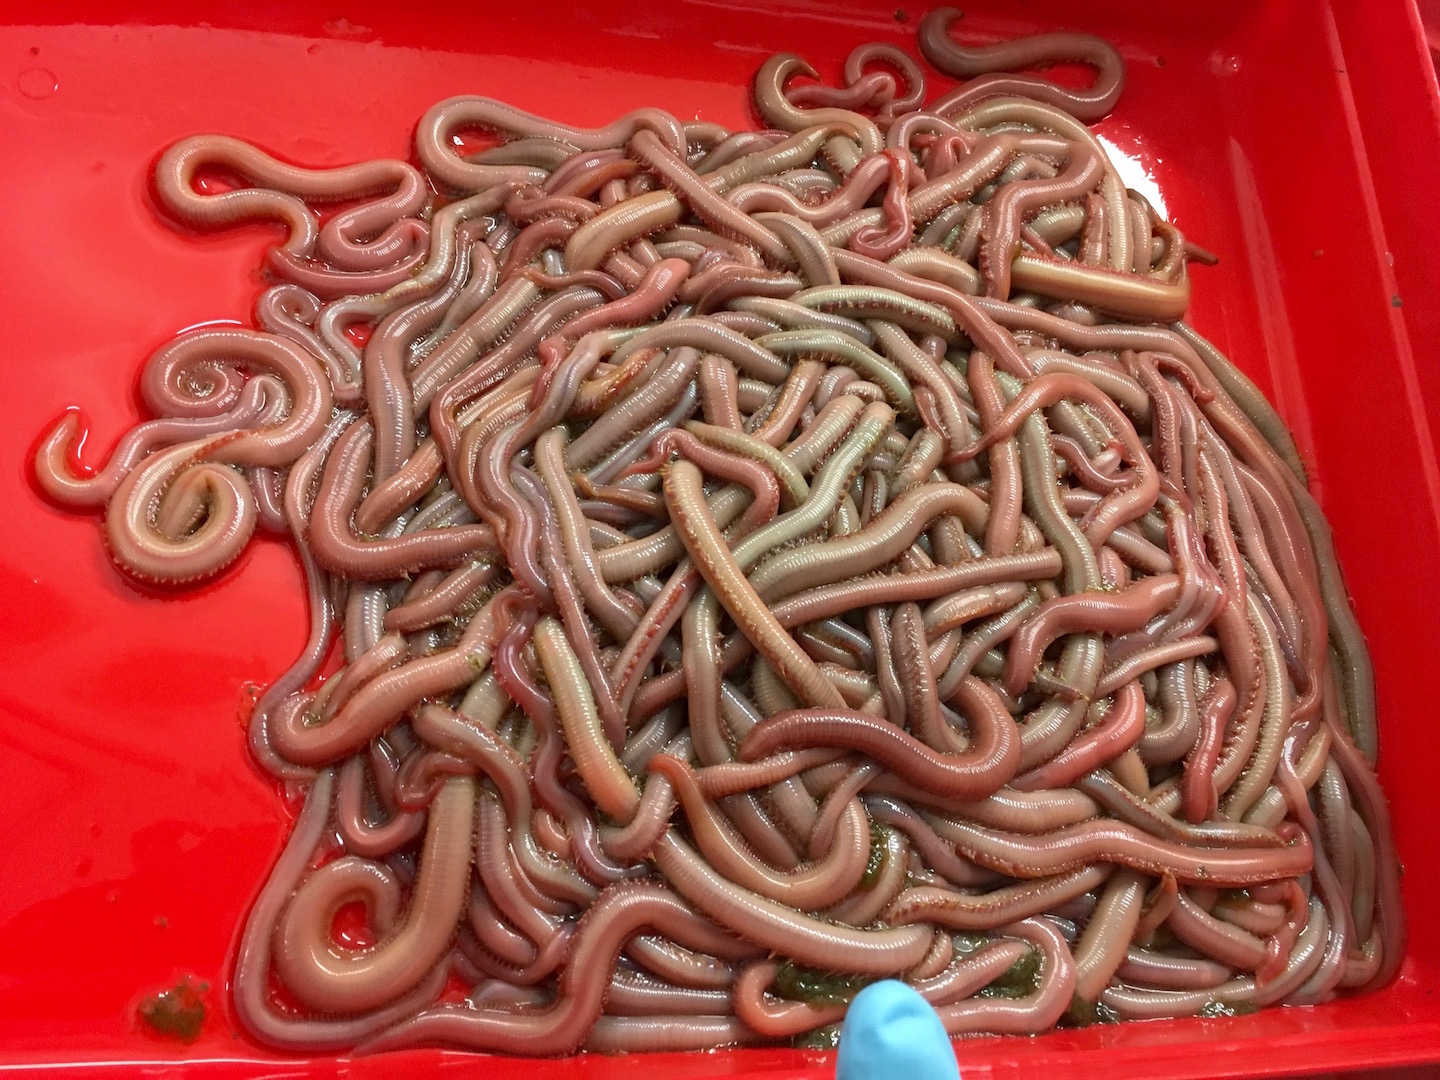 Bloodworms Find a New Home at the CCAR - Center for Cooperative Aquaculture  Research - University of Maine